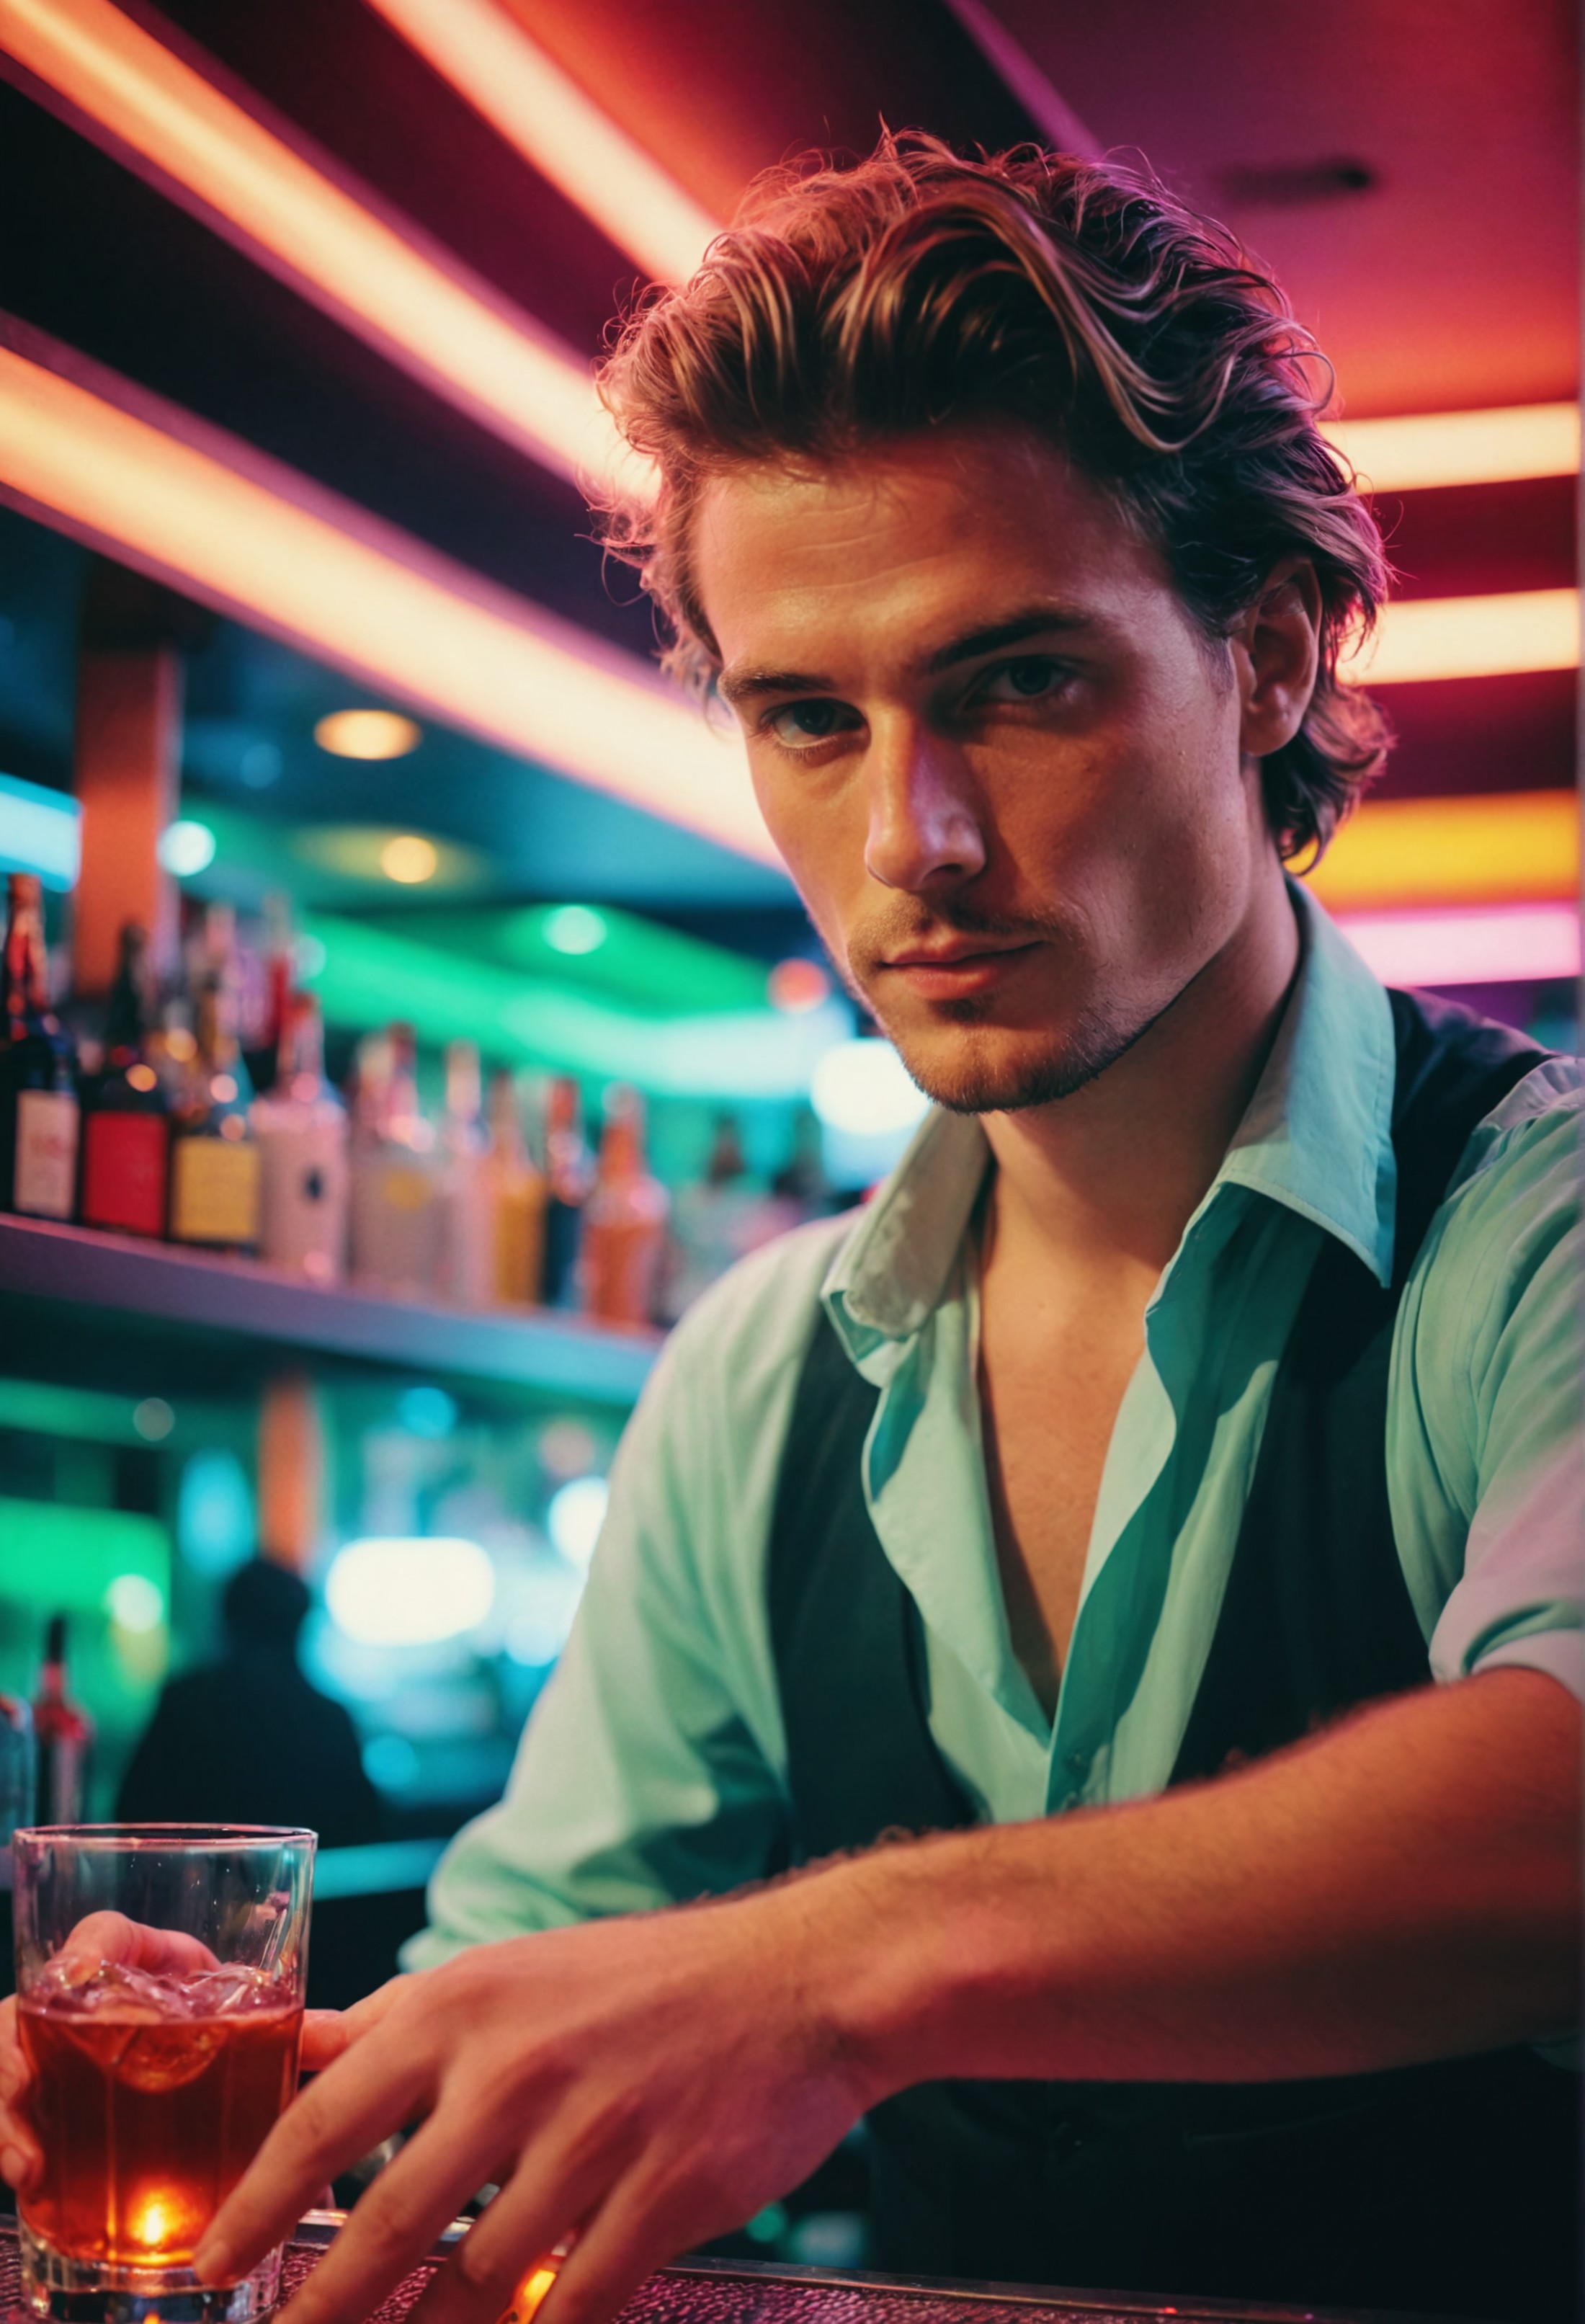 hyperdetailed photograph, neon ambient light, a bartender in a nightclub, analog film, amateur photography, overexposed, s...